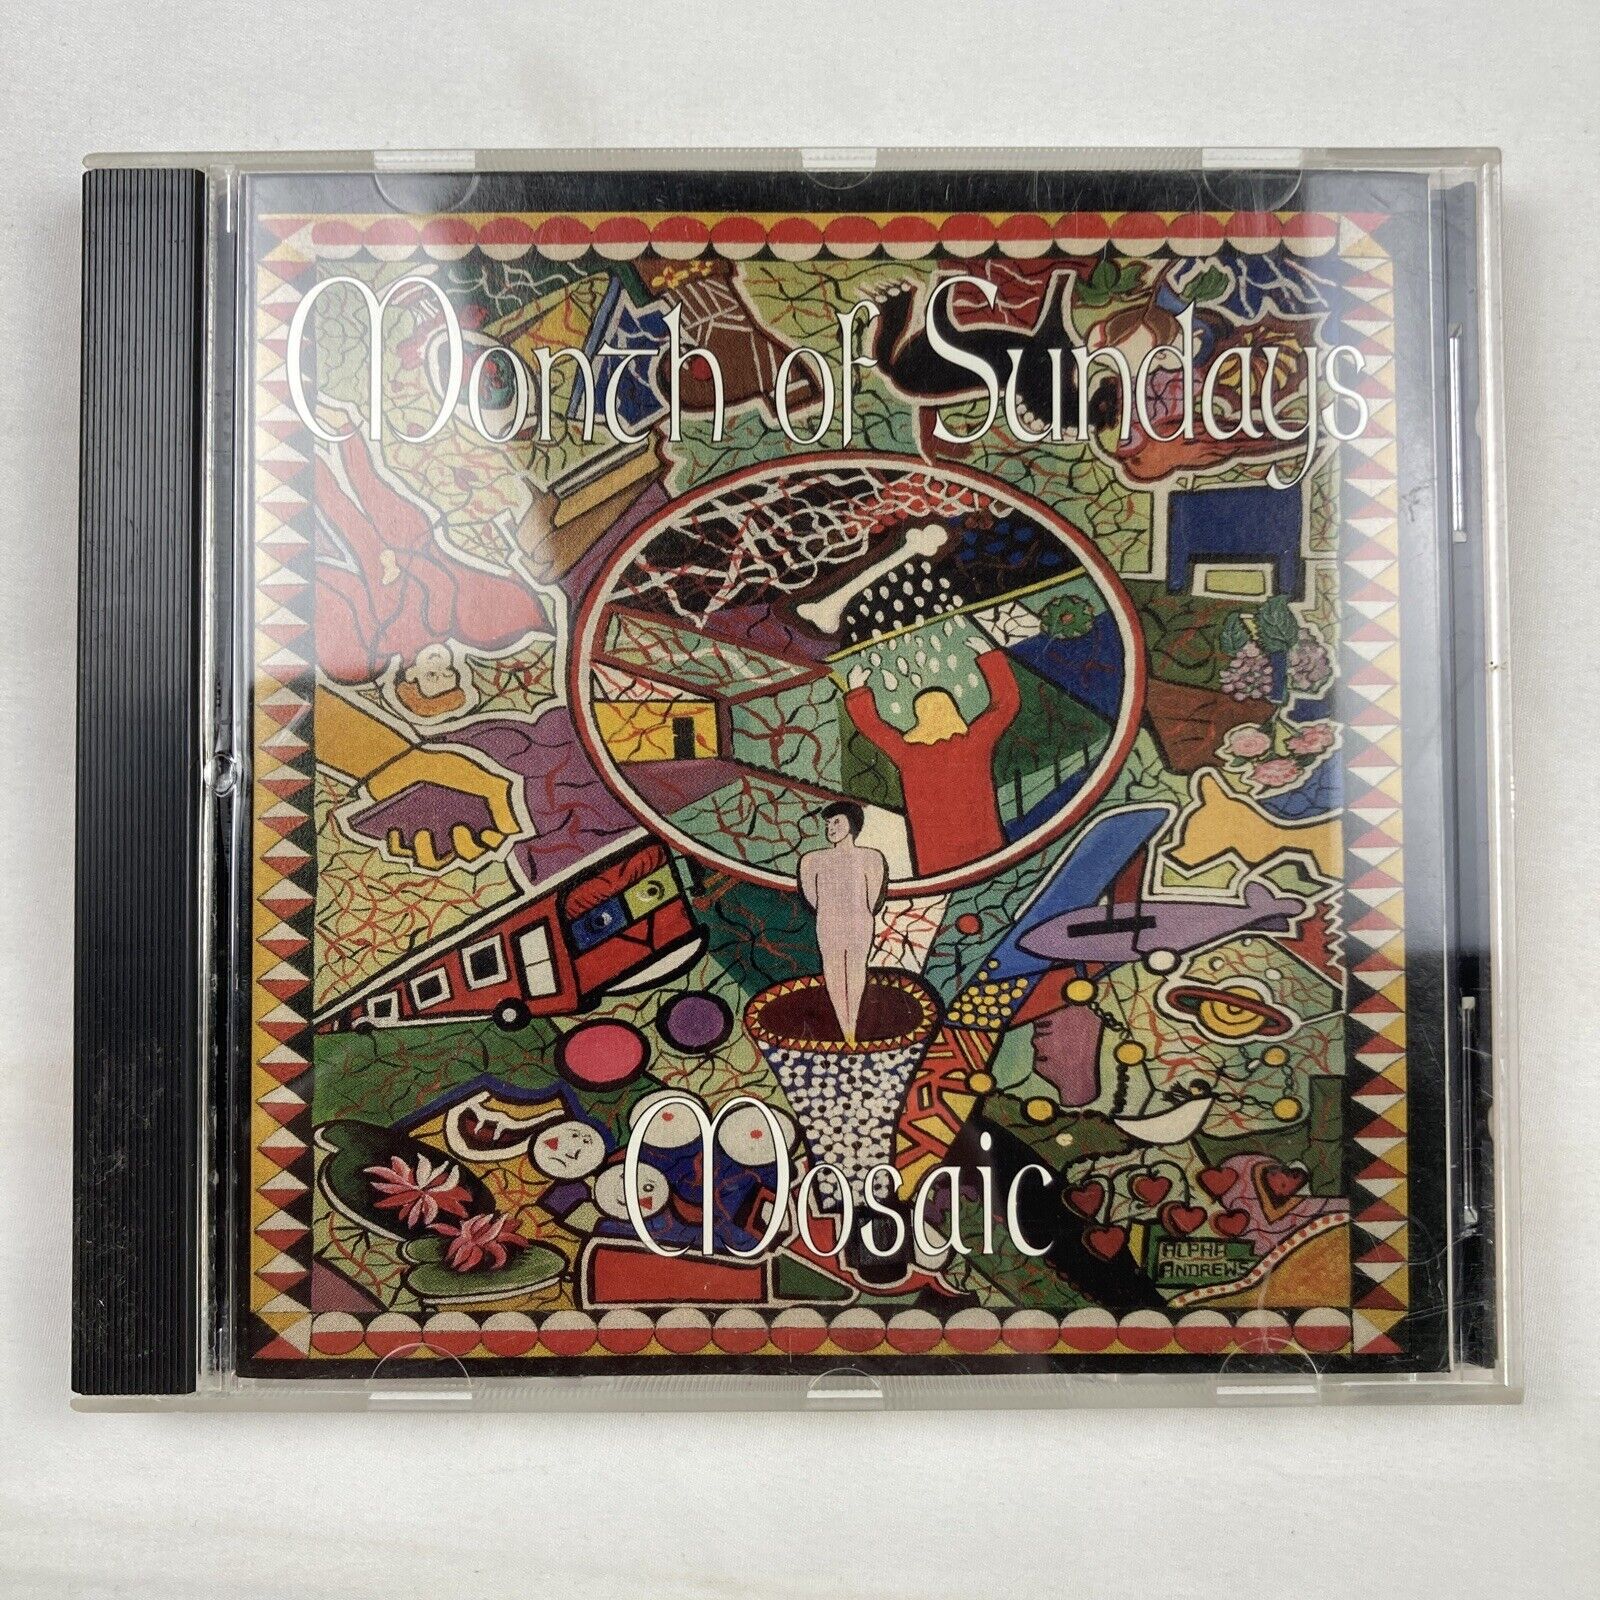 Mosaic by Month of Sundays (CD, Aug-1993, Railroad Records)